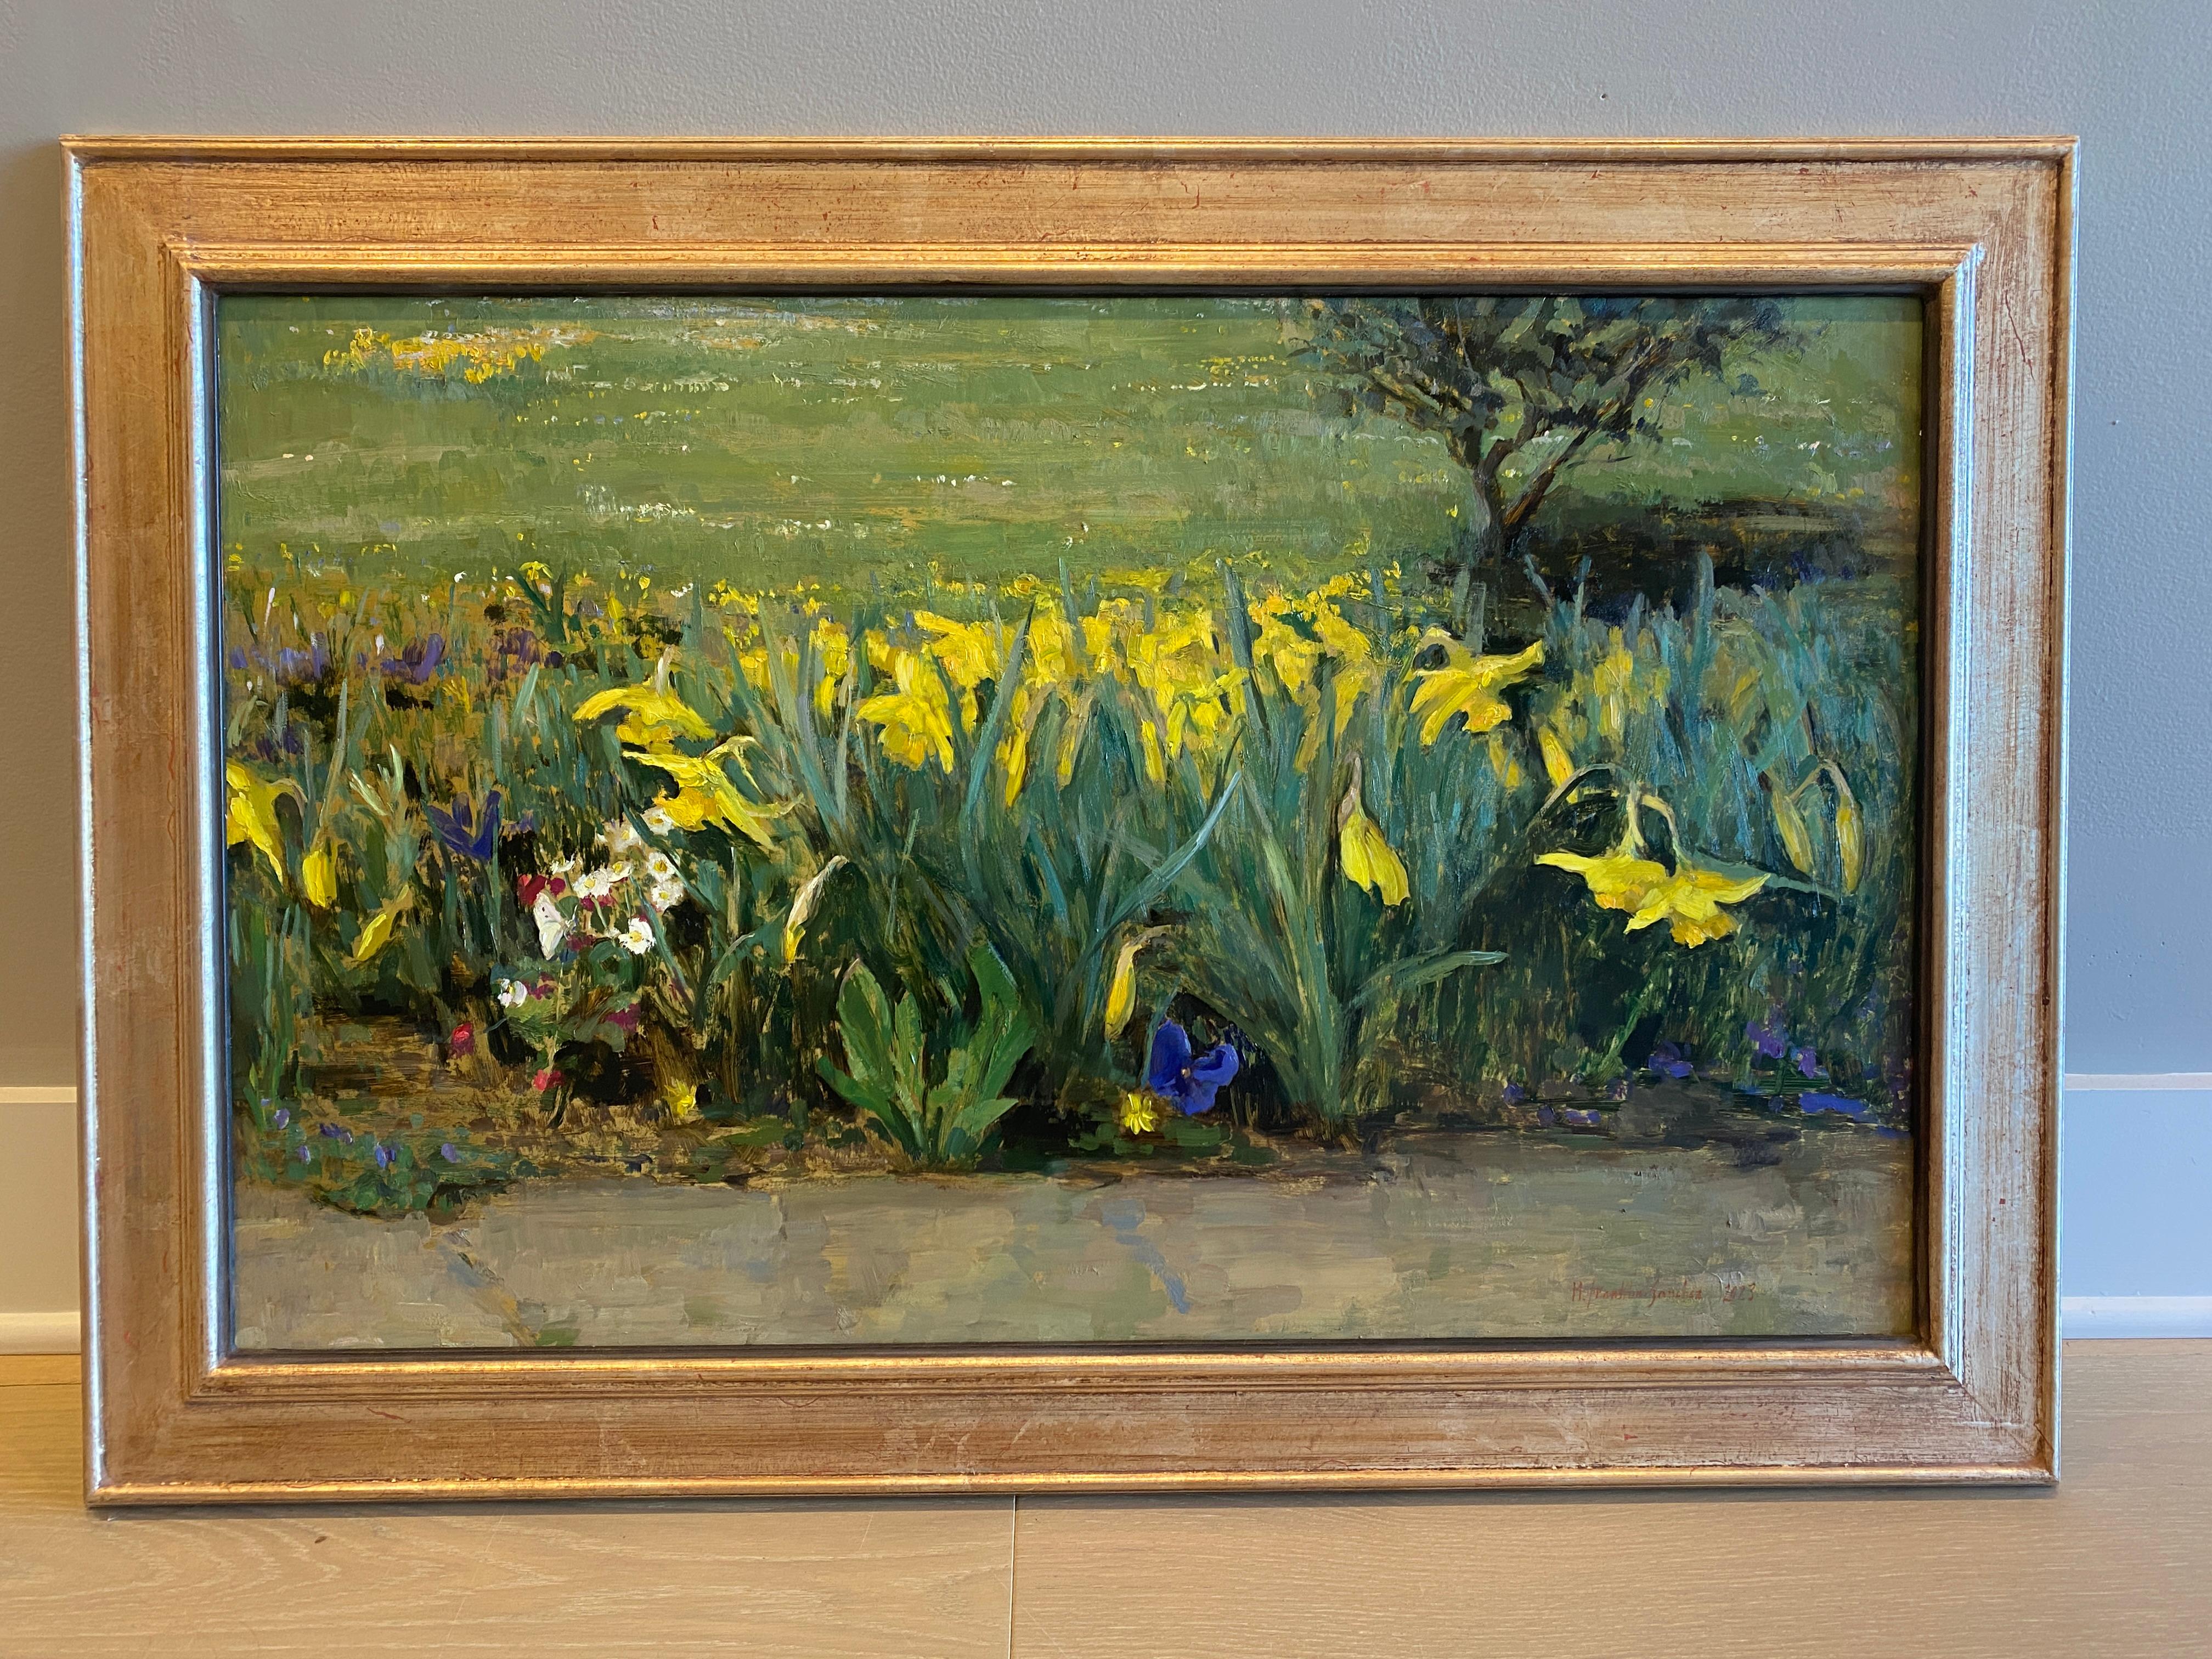 Daffodils in the Sunshine - Painting by Melissa Franklin Sanchez